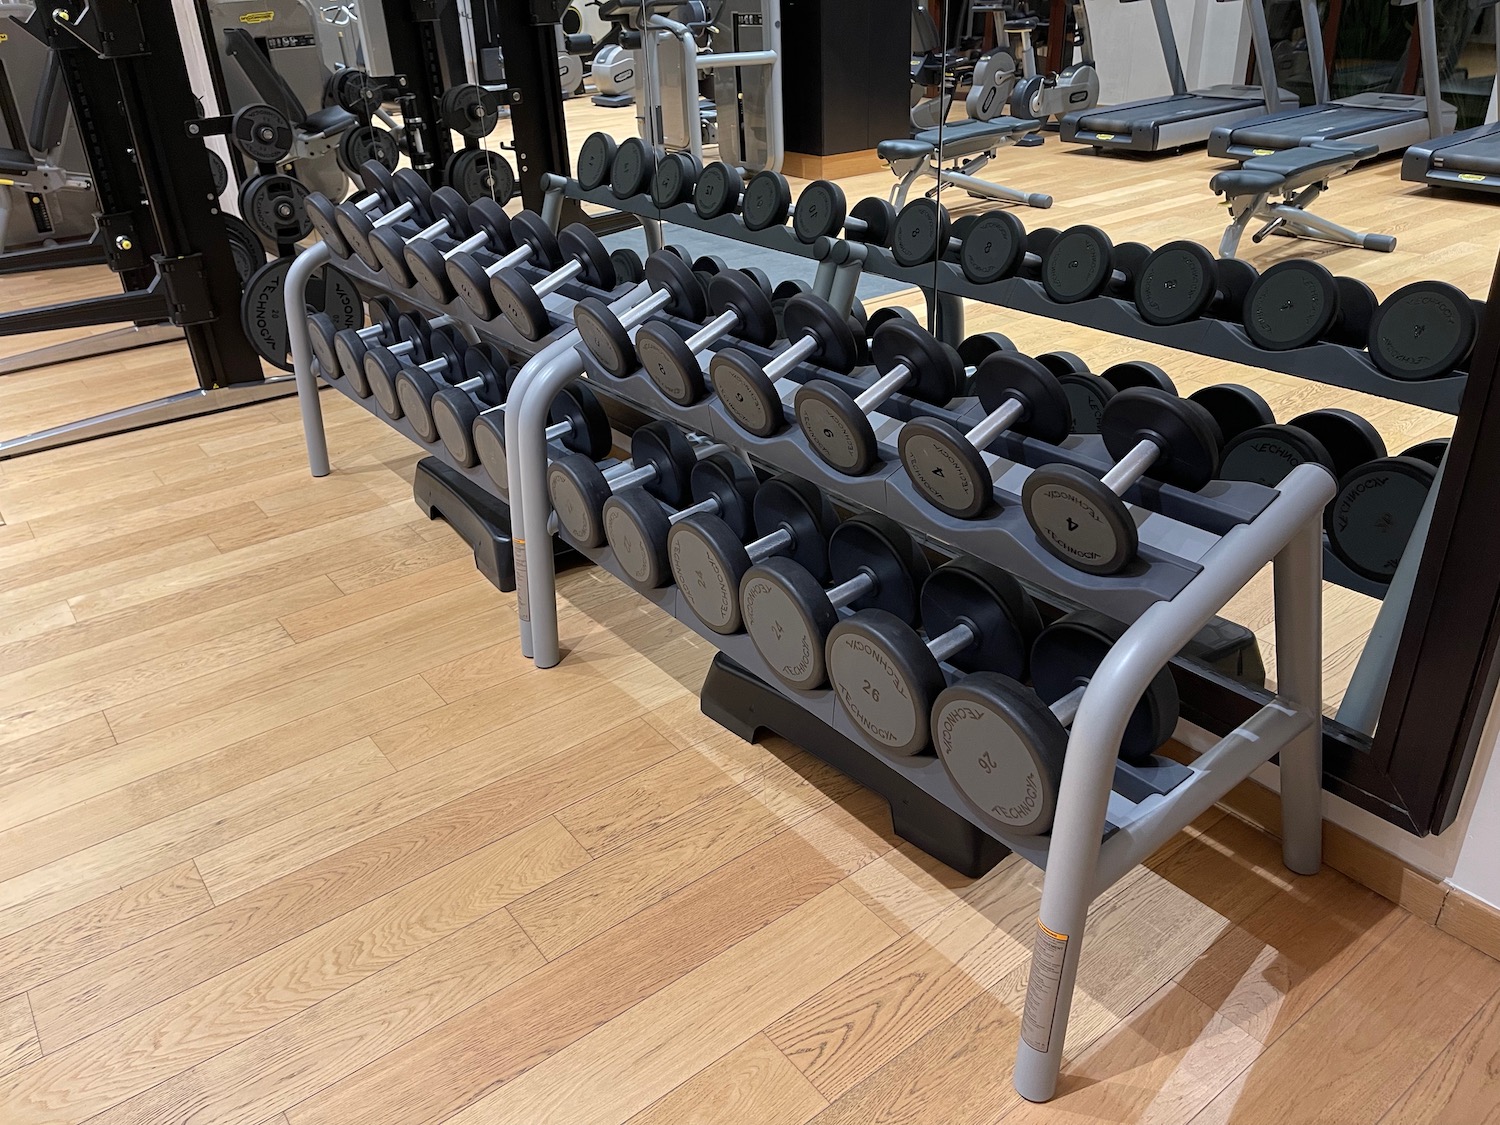 a group of dumbbells on a rack